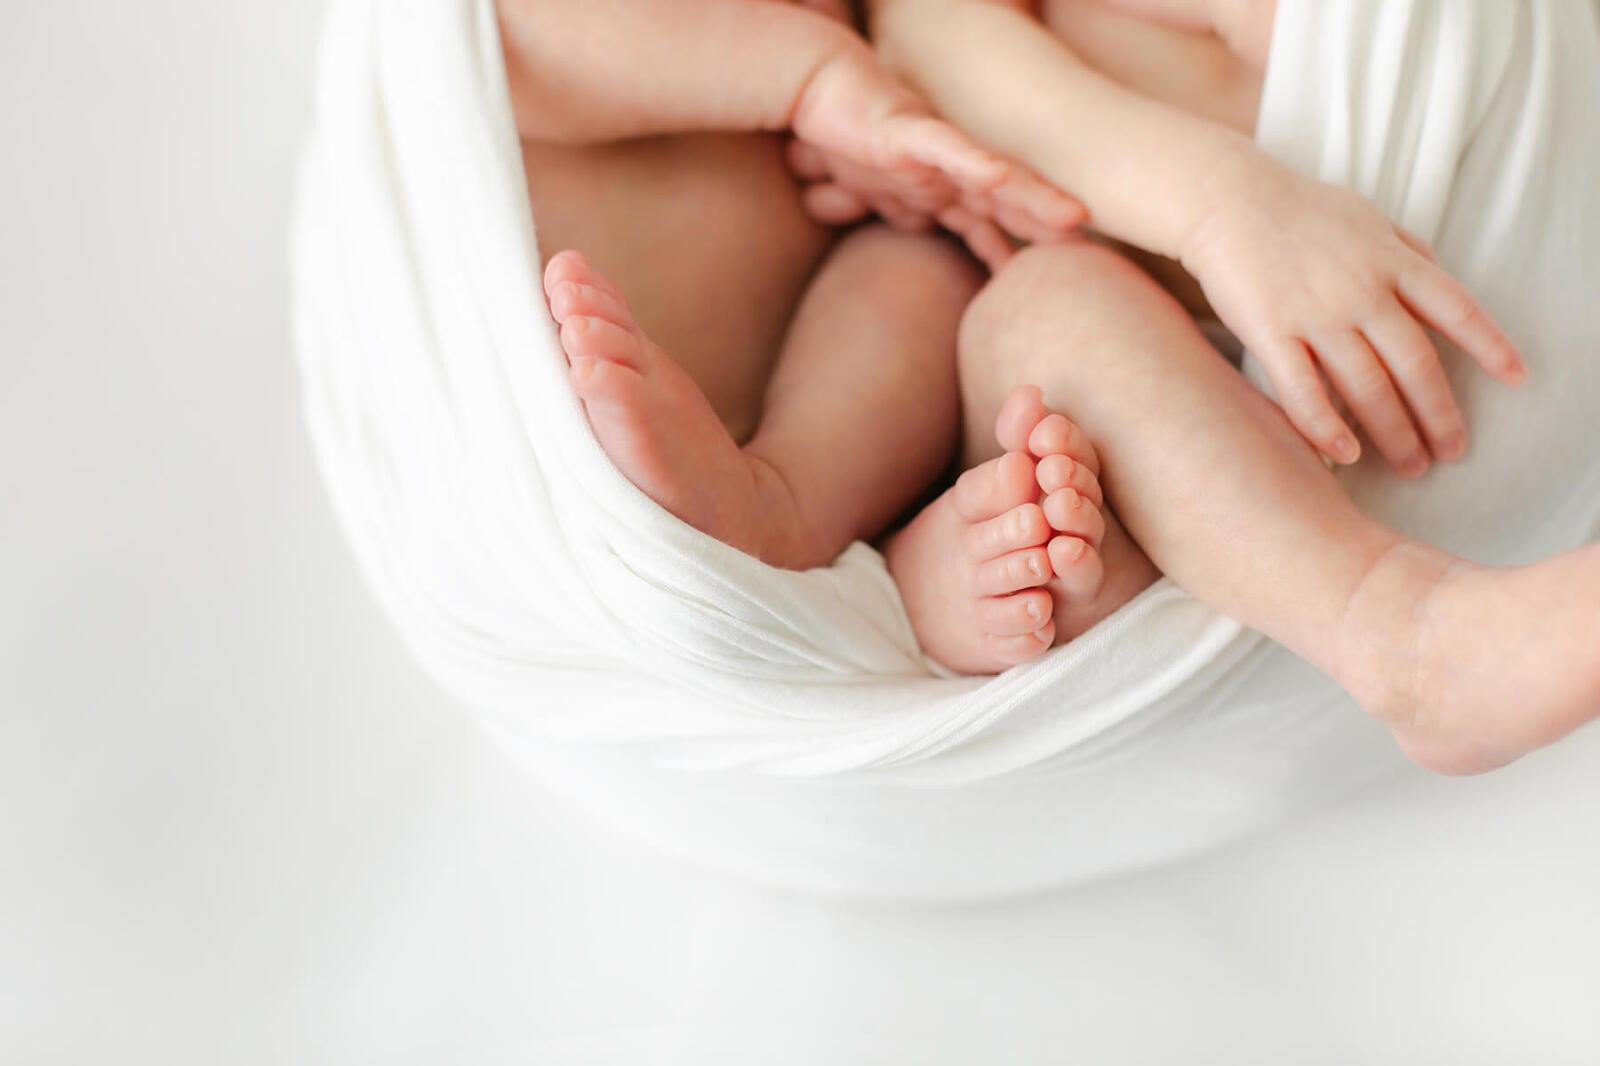 omaha twin newborn babies toes and hands memorialized in beautiful film like photography style